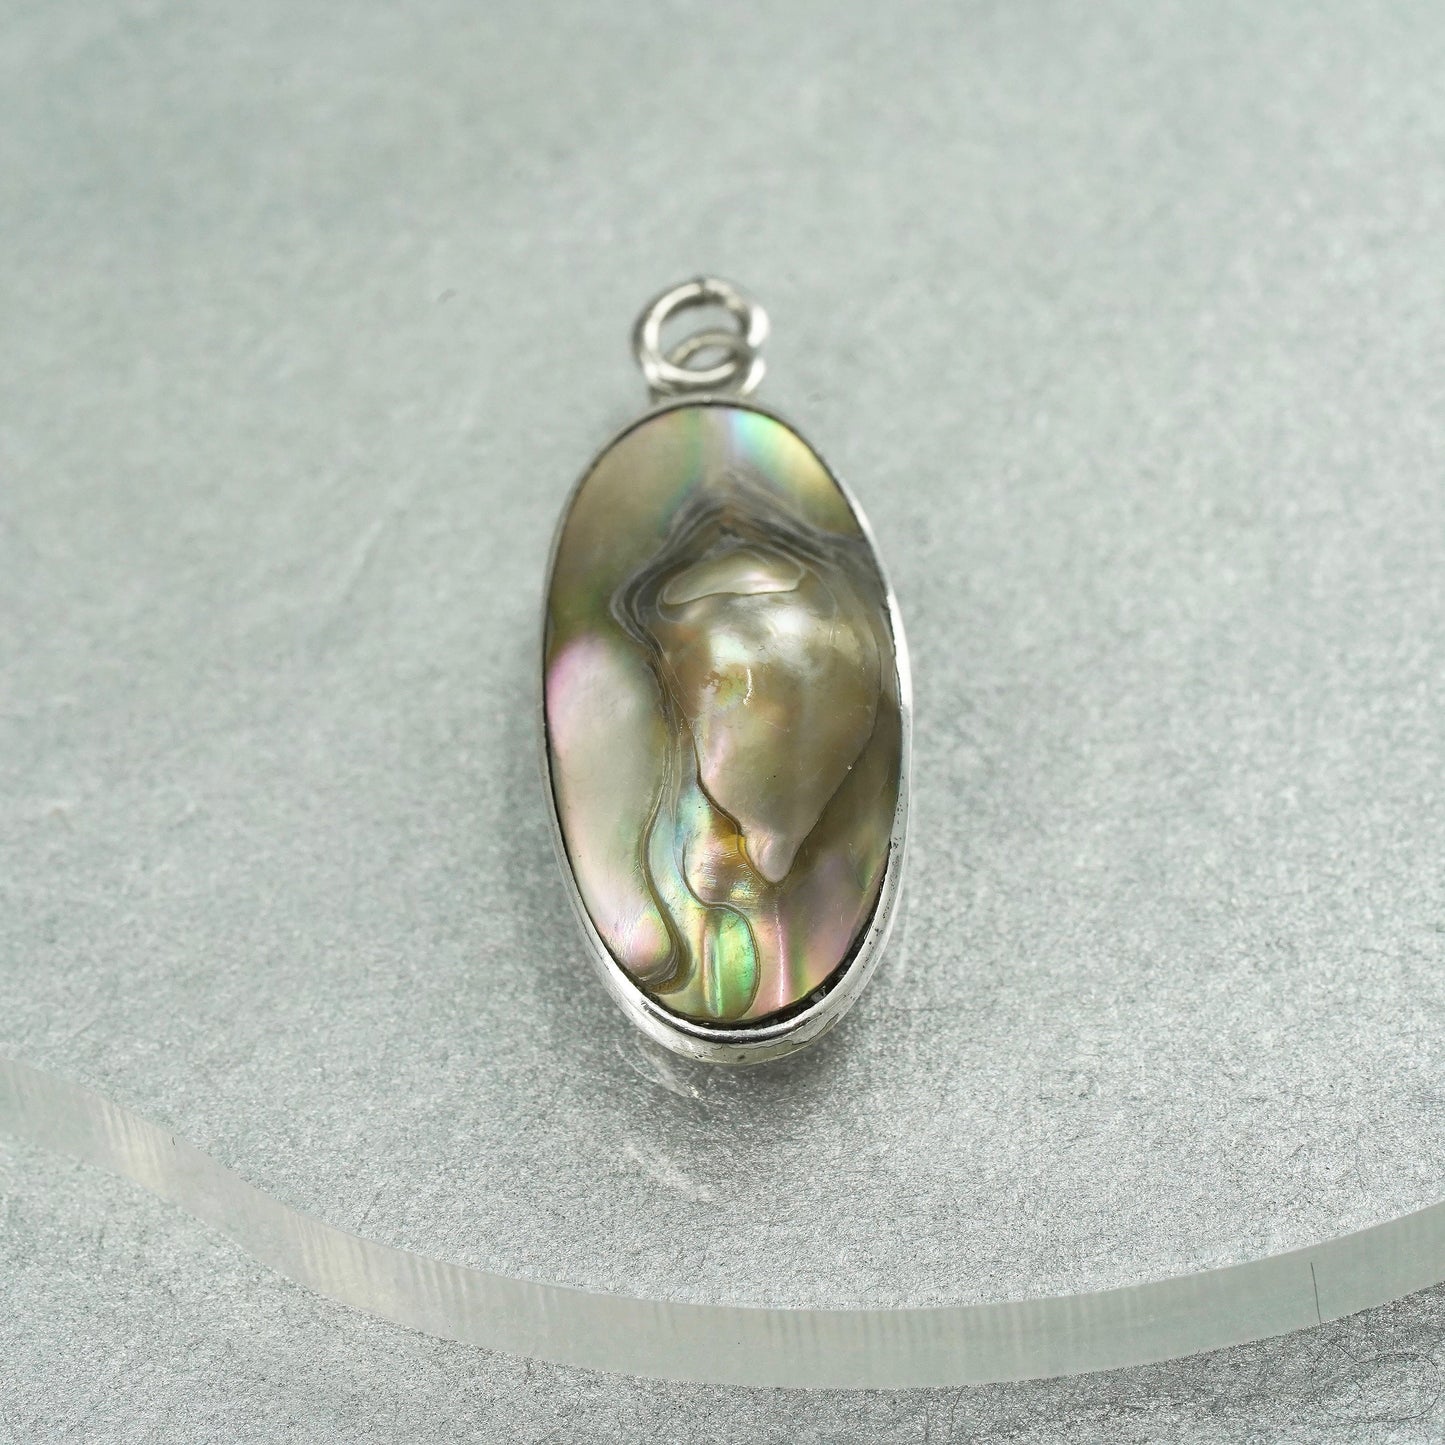 Vintage sterling 925 silver handmade charm pendant with blister pearl